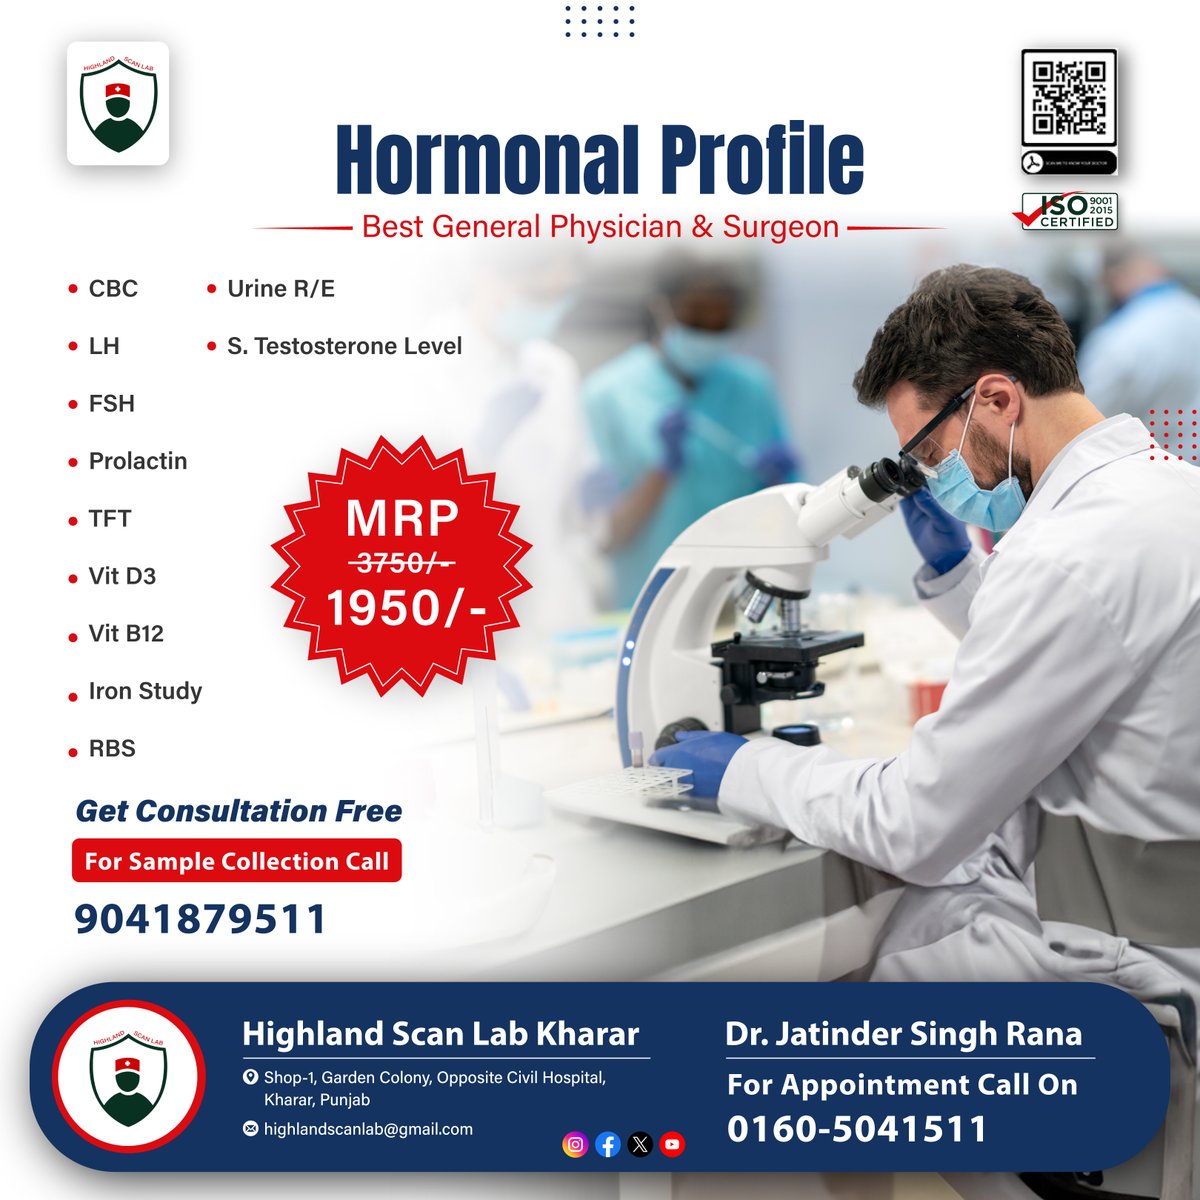 Unlock the secrets of your body with our best #HormonalProfilePackage at #HighlandScanLab. Understand your health better, take control today!
.
#KnowYourBody #HealthcareSector #MedicalLab #Healthcare #pathlab #bloodtest #Drjatindersingh #Diagnostics #kharar #pathology #Health